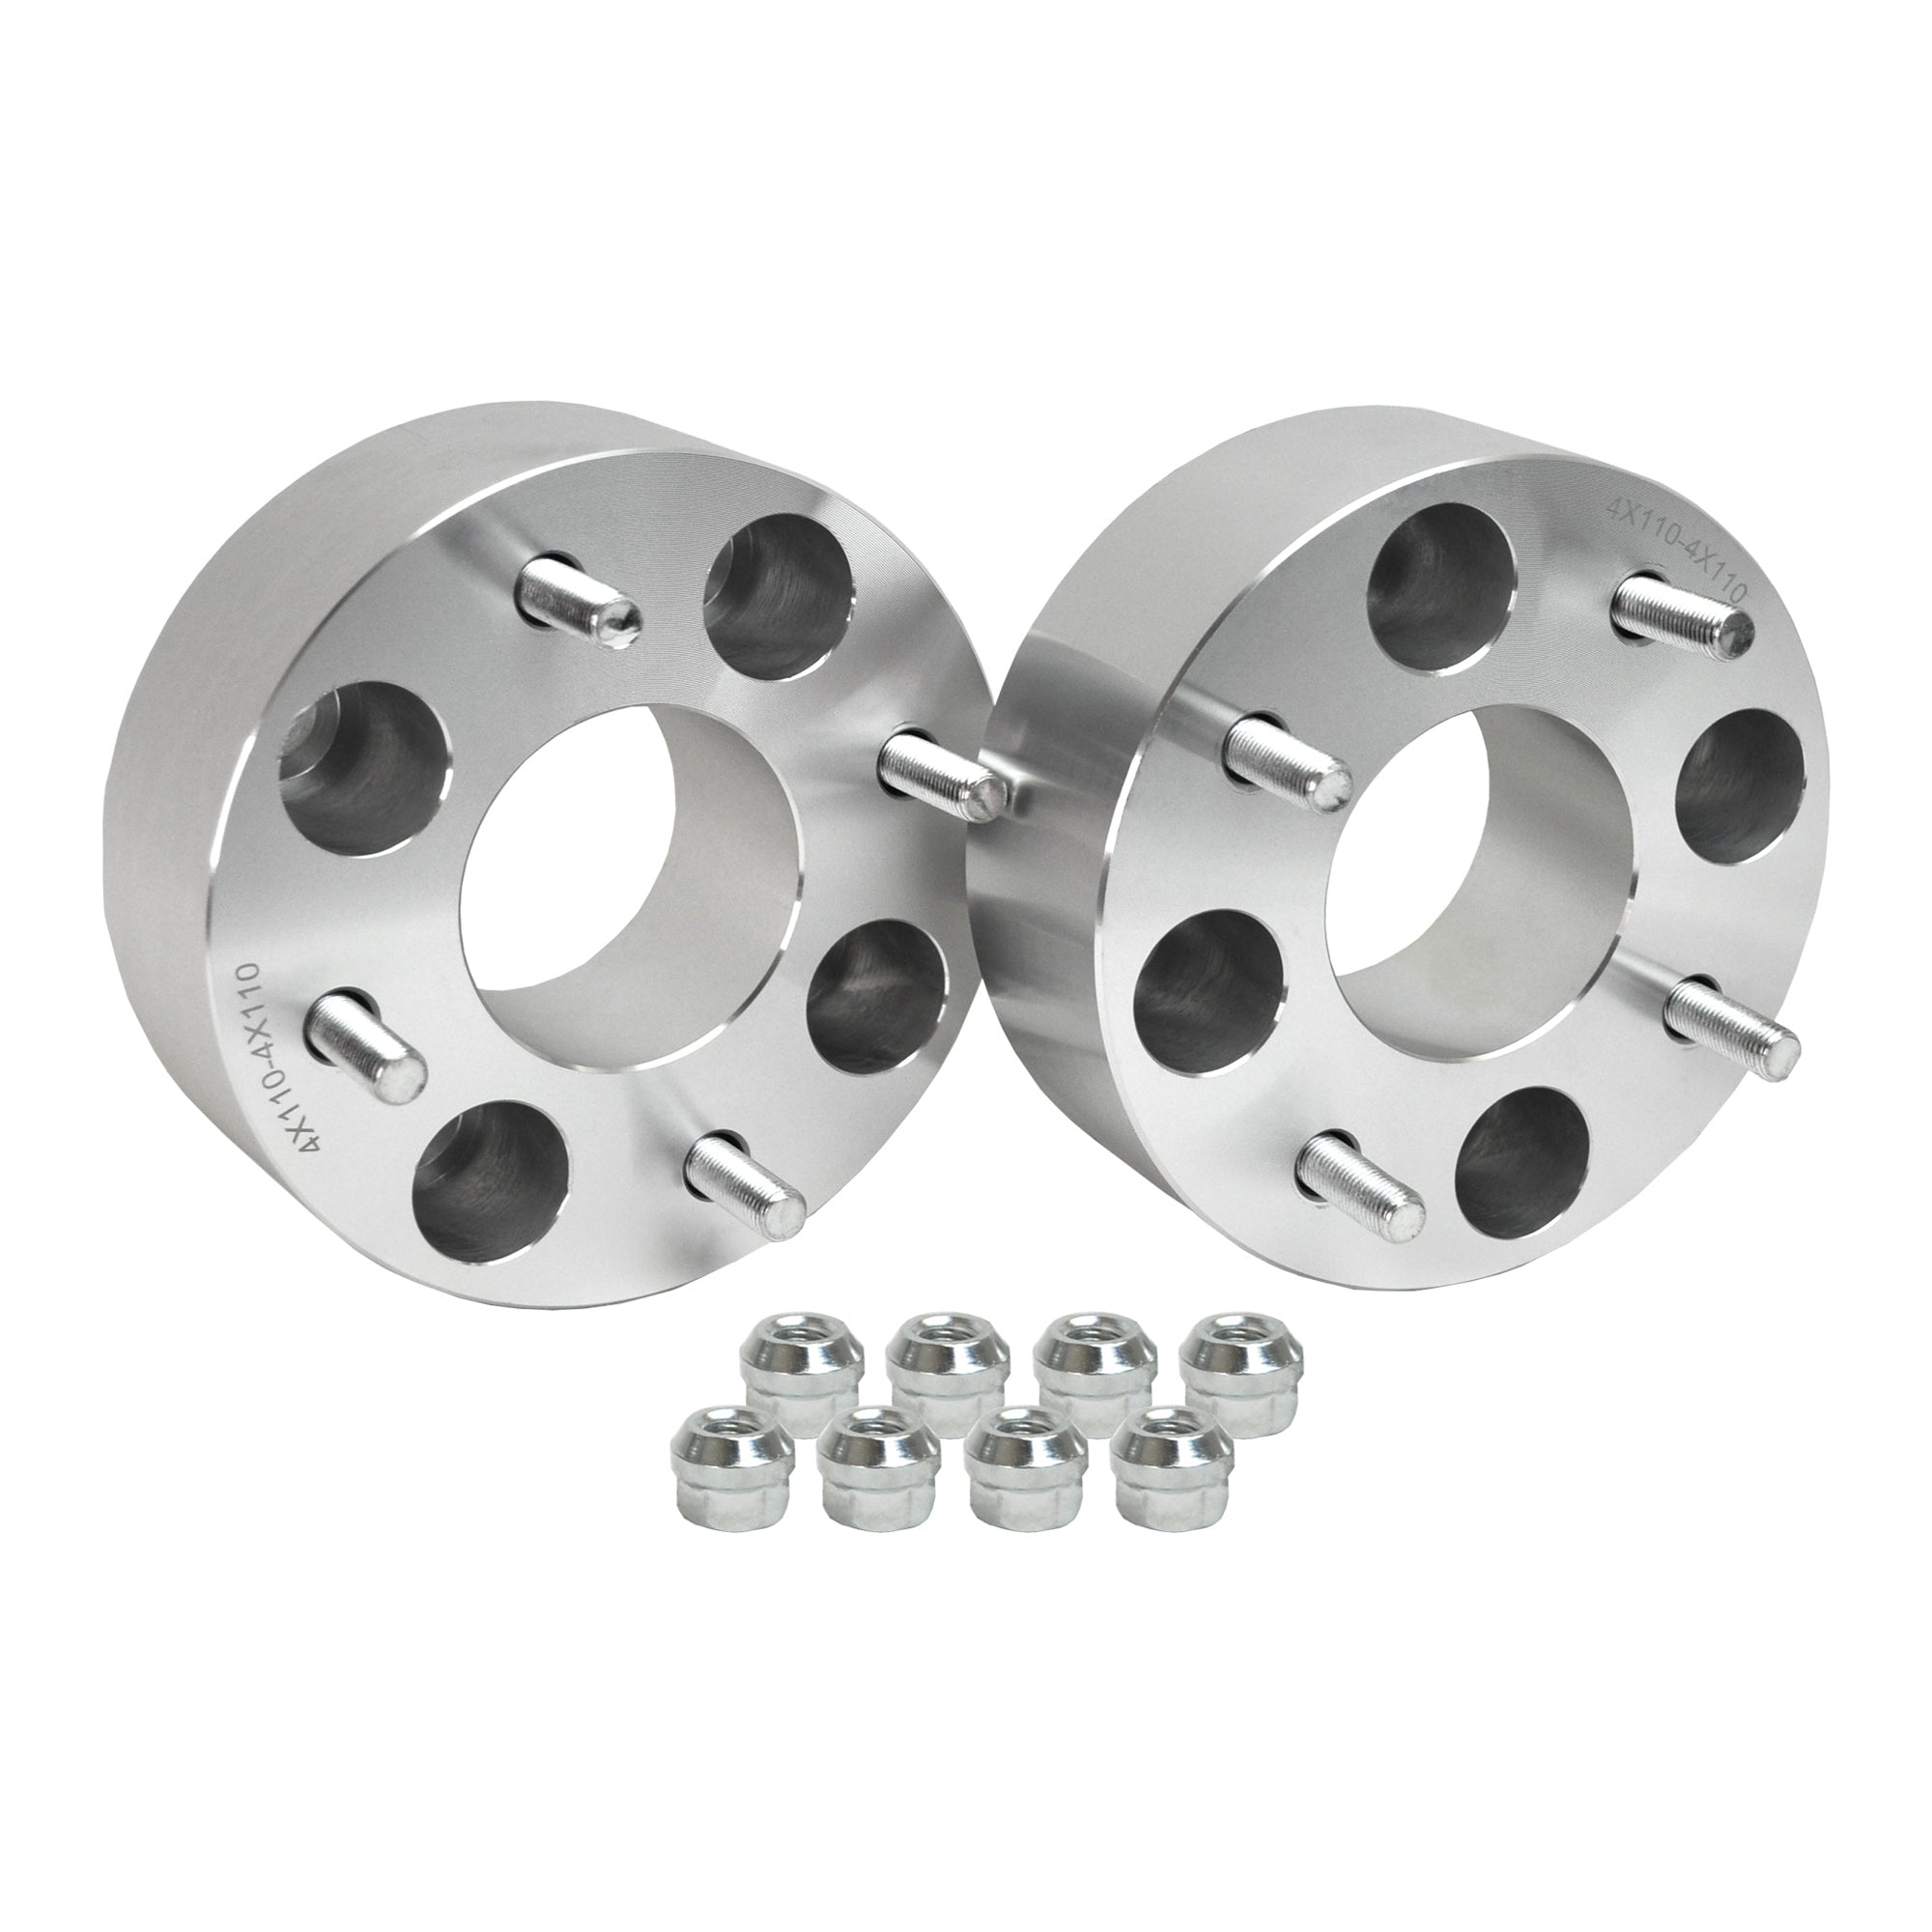 Wheel Spacer for Bombardier Quest 650 Max 